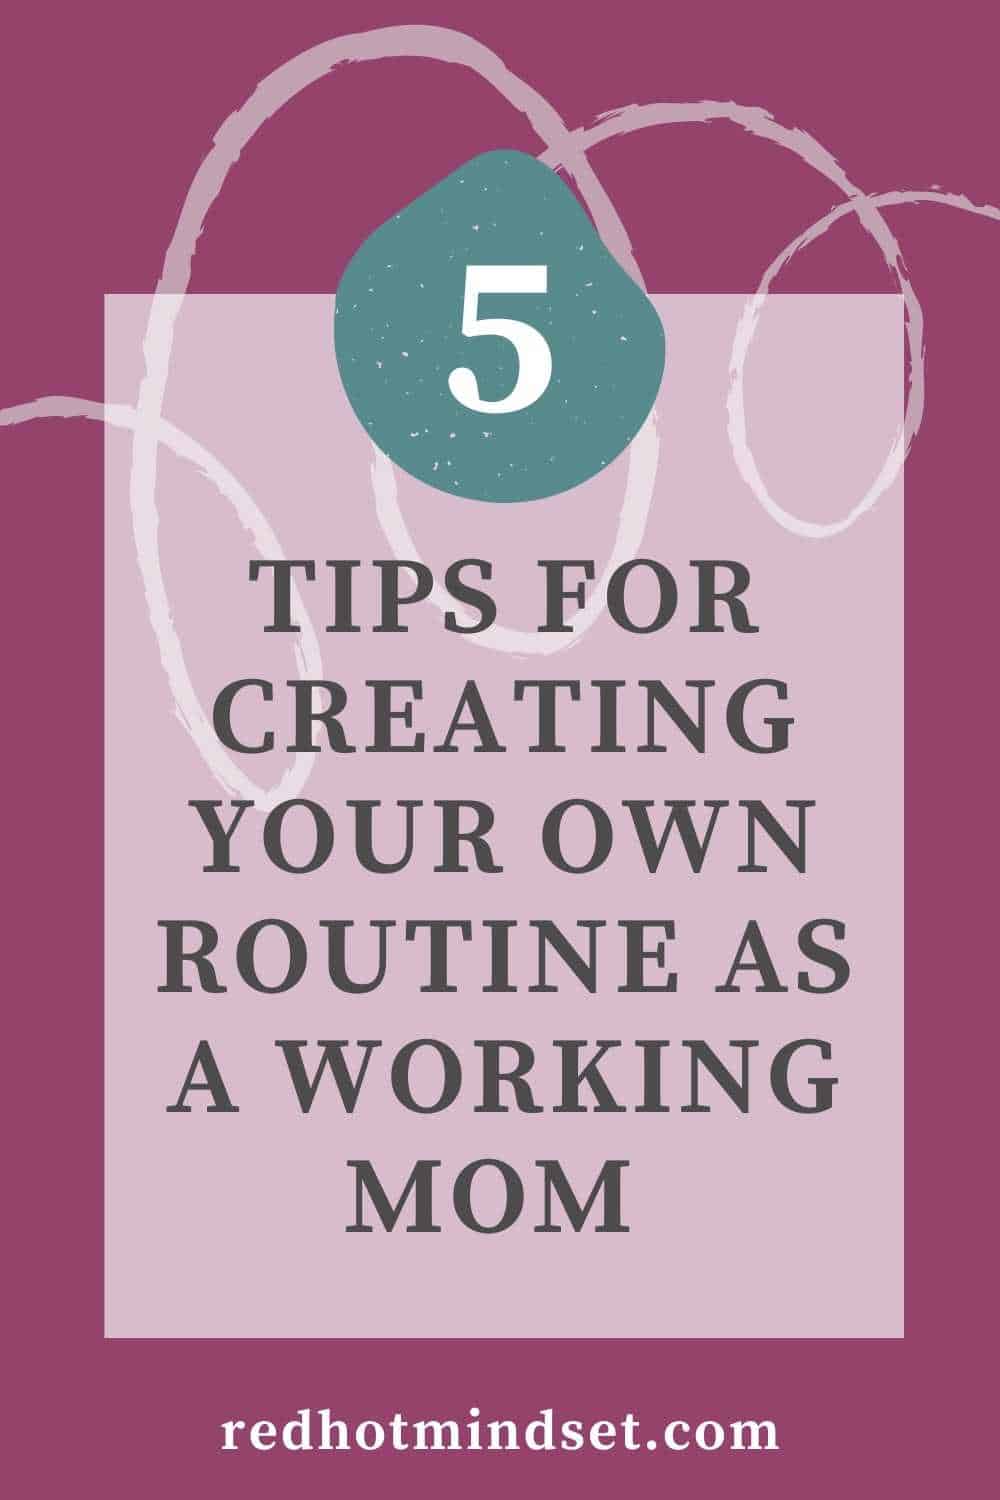 Ep 114 | Work-life balance as a working mom | routine tips